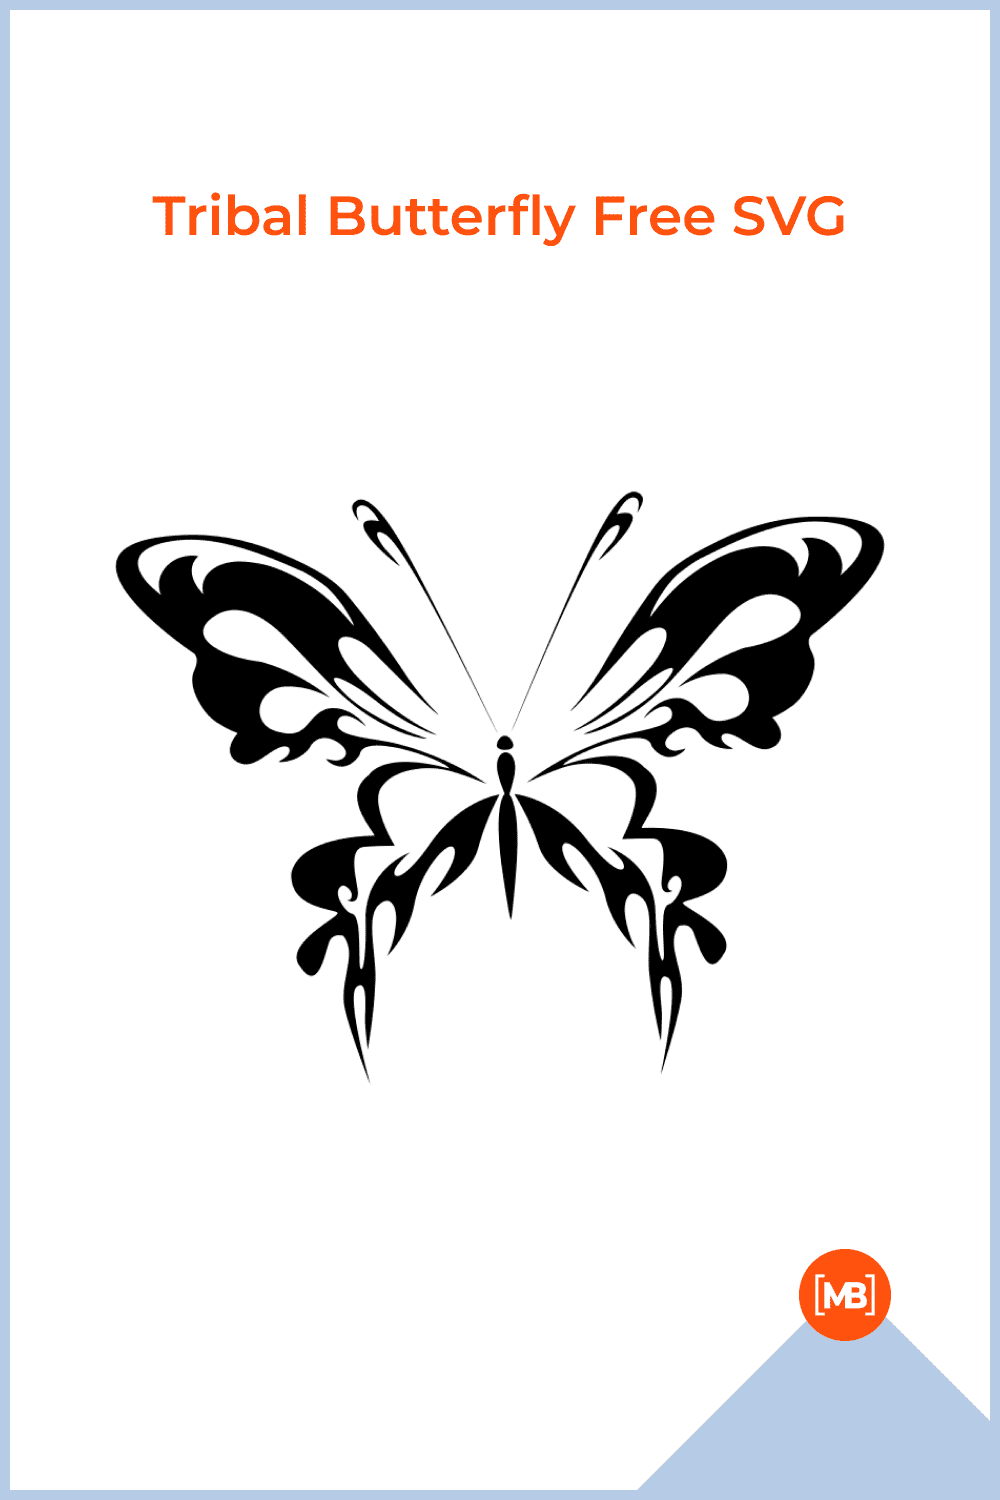 Tribal Butterfly Free SVG.